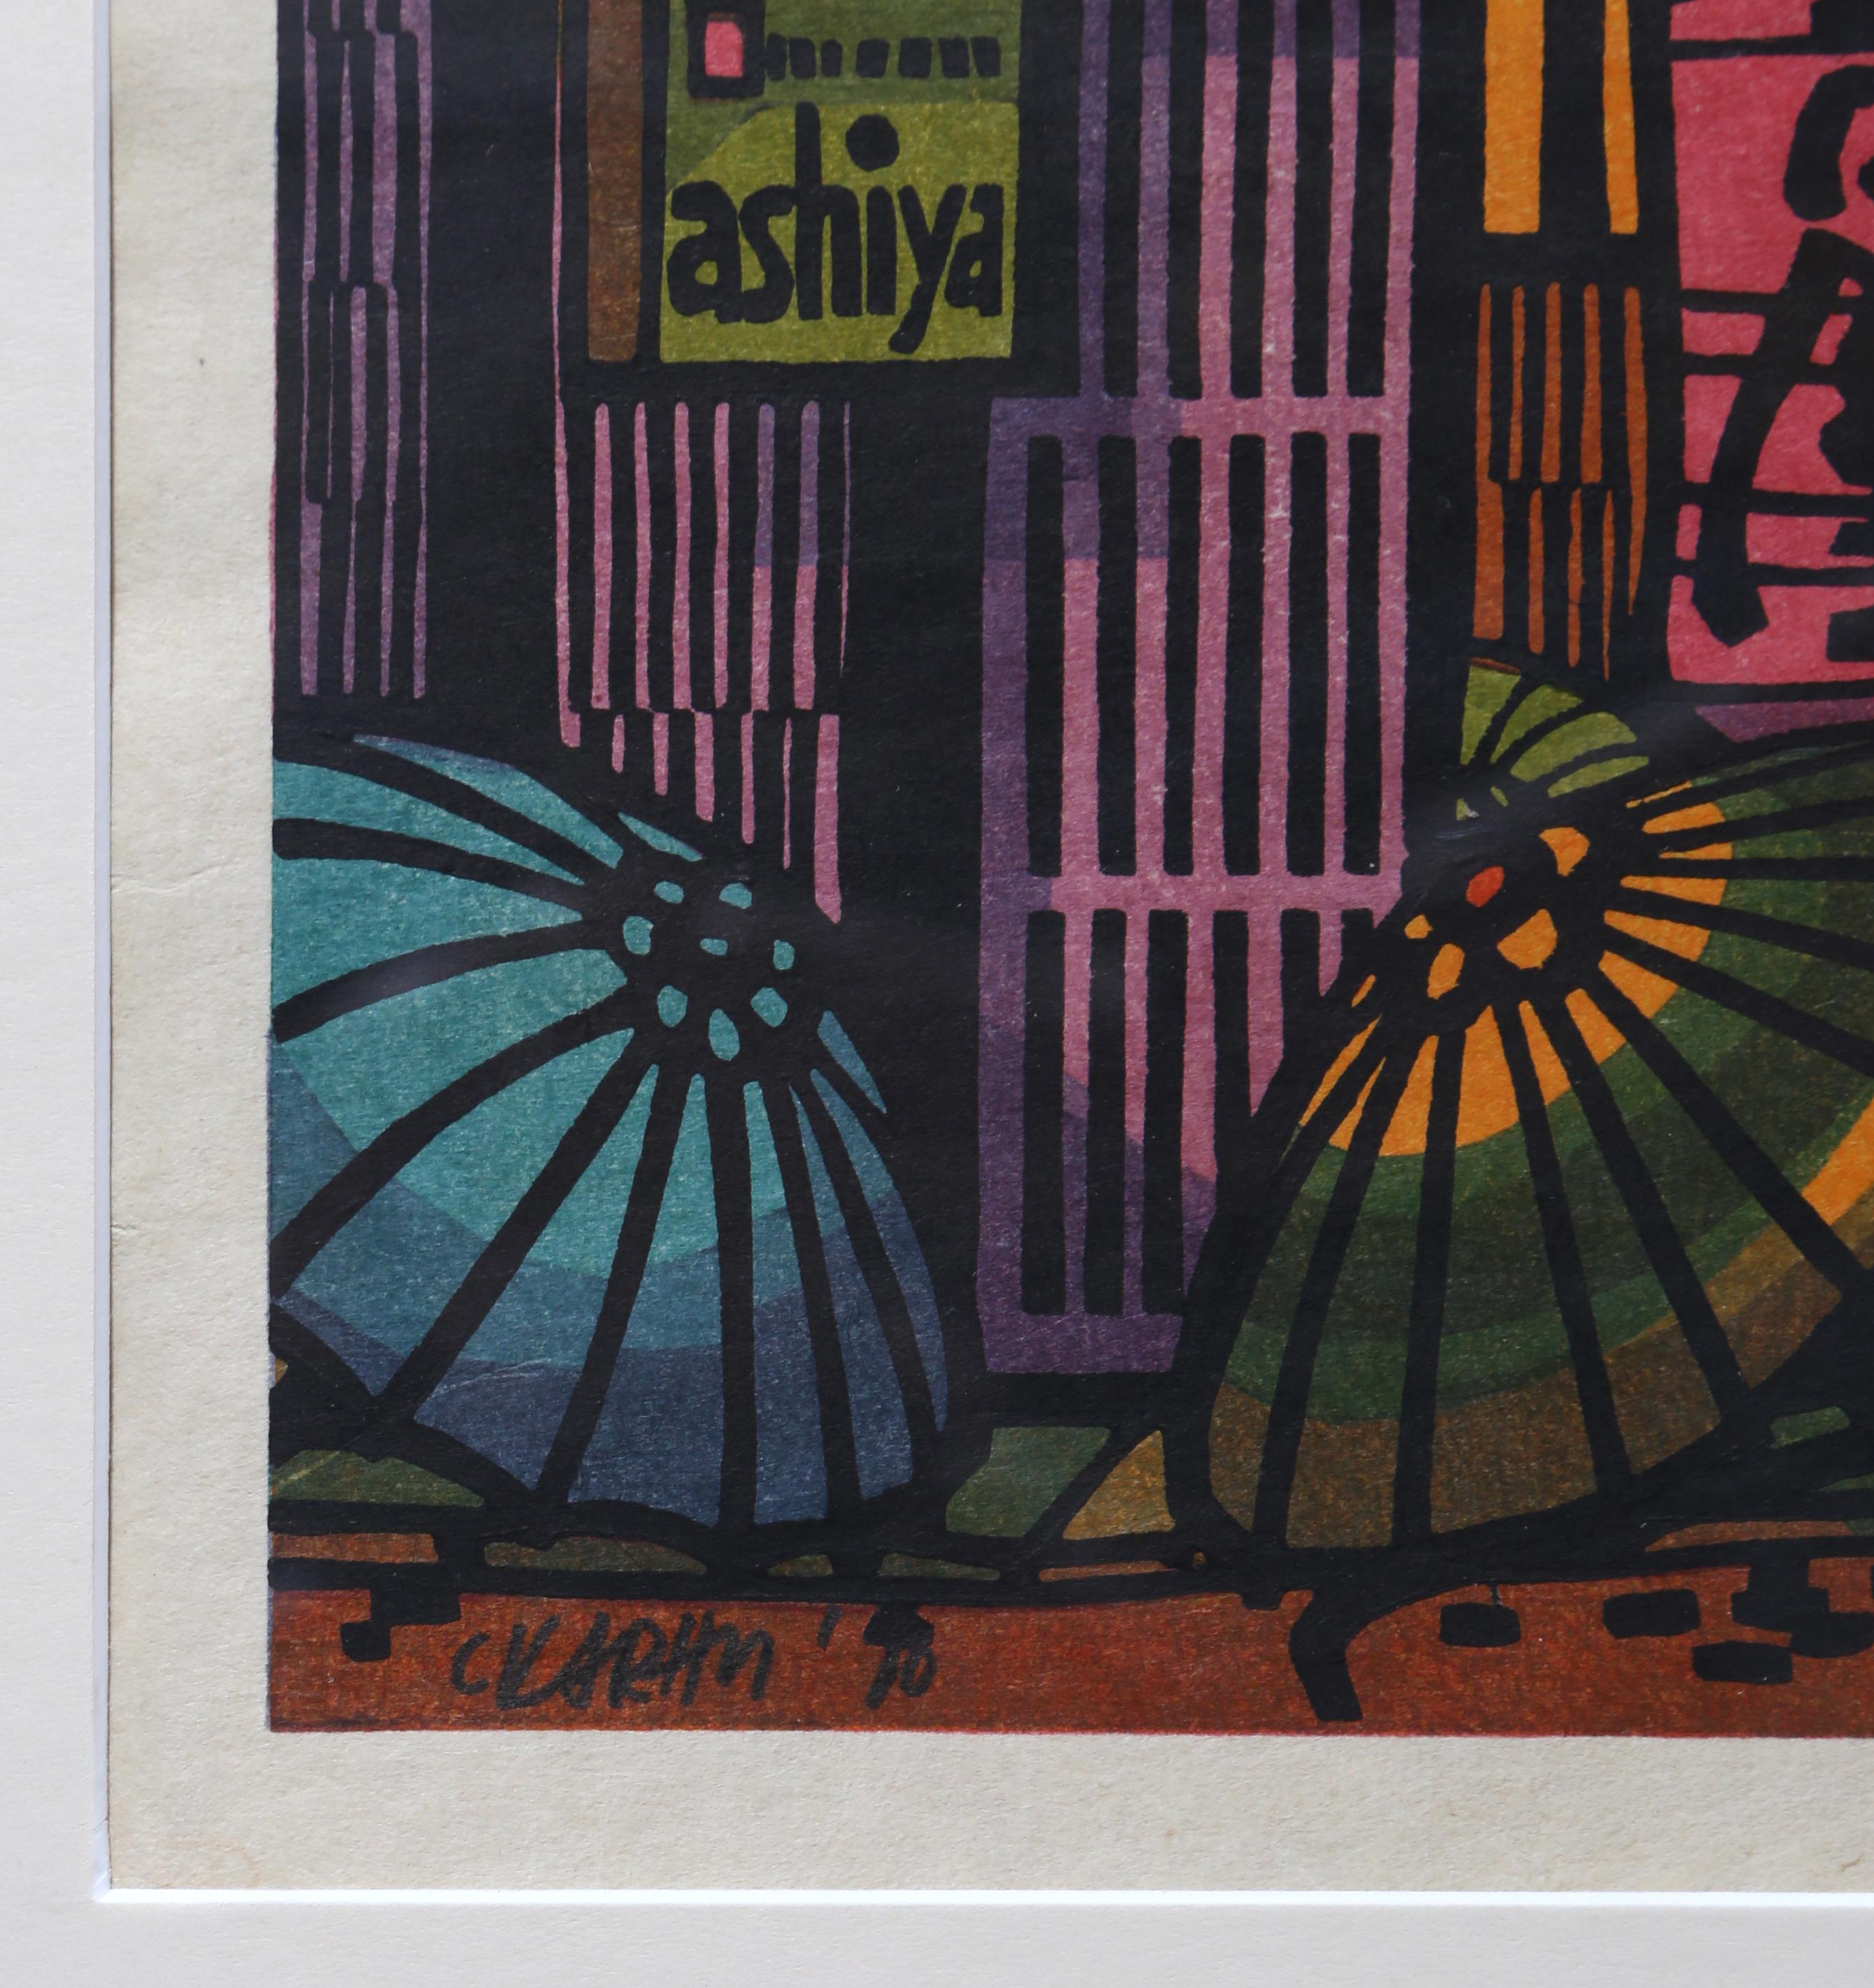 Artist: Clifton Karhu, American/Japanese (1927 - 2007)
Title: Ashiya
Year: 1978
Medium: Woodcut on Wove Paper, signed and dated in ink l.l.
Size: 7 x 9.5 inches
Frame Size: 17 x 19.5 inches